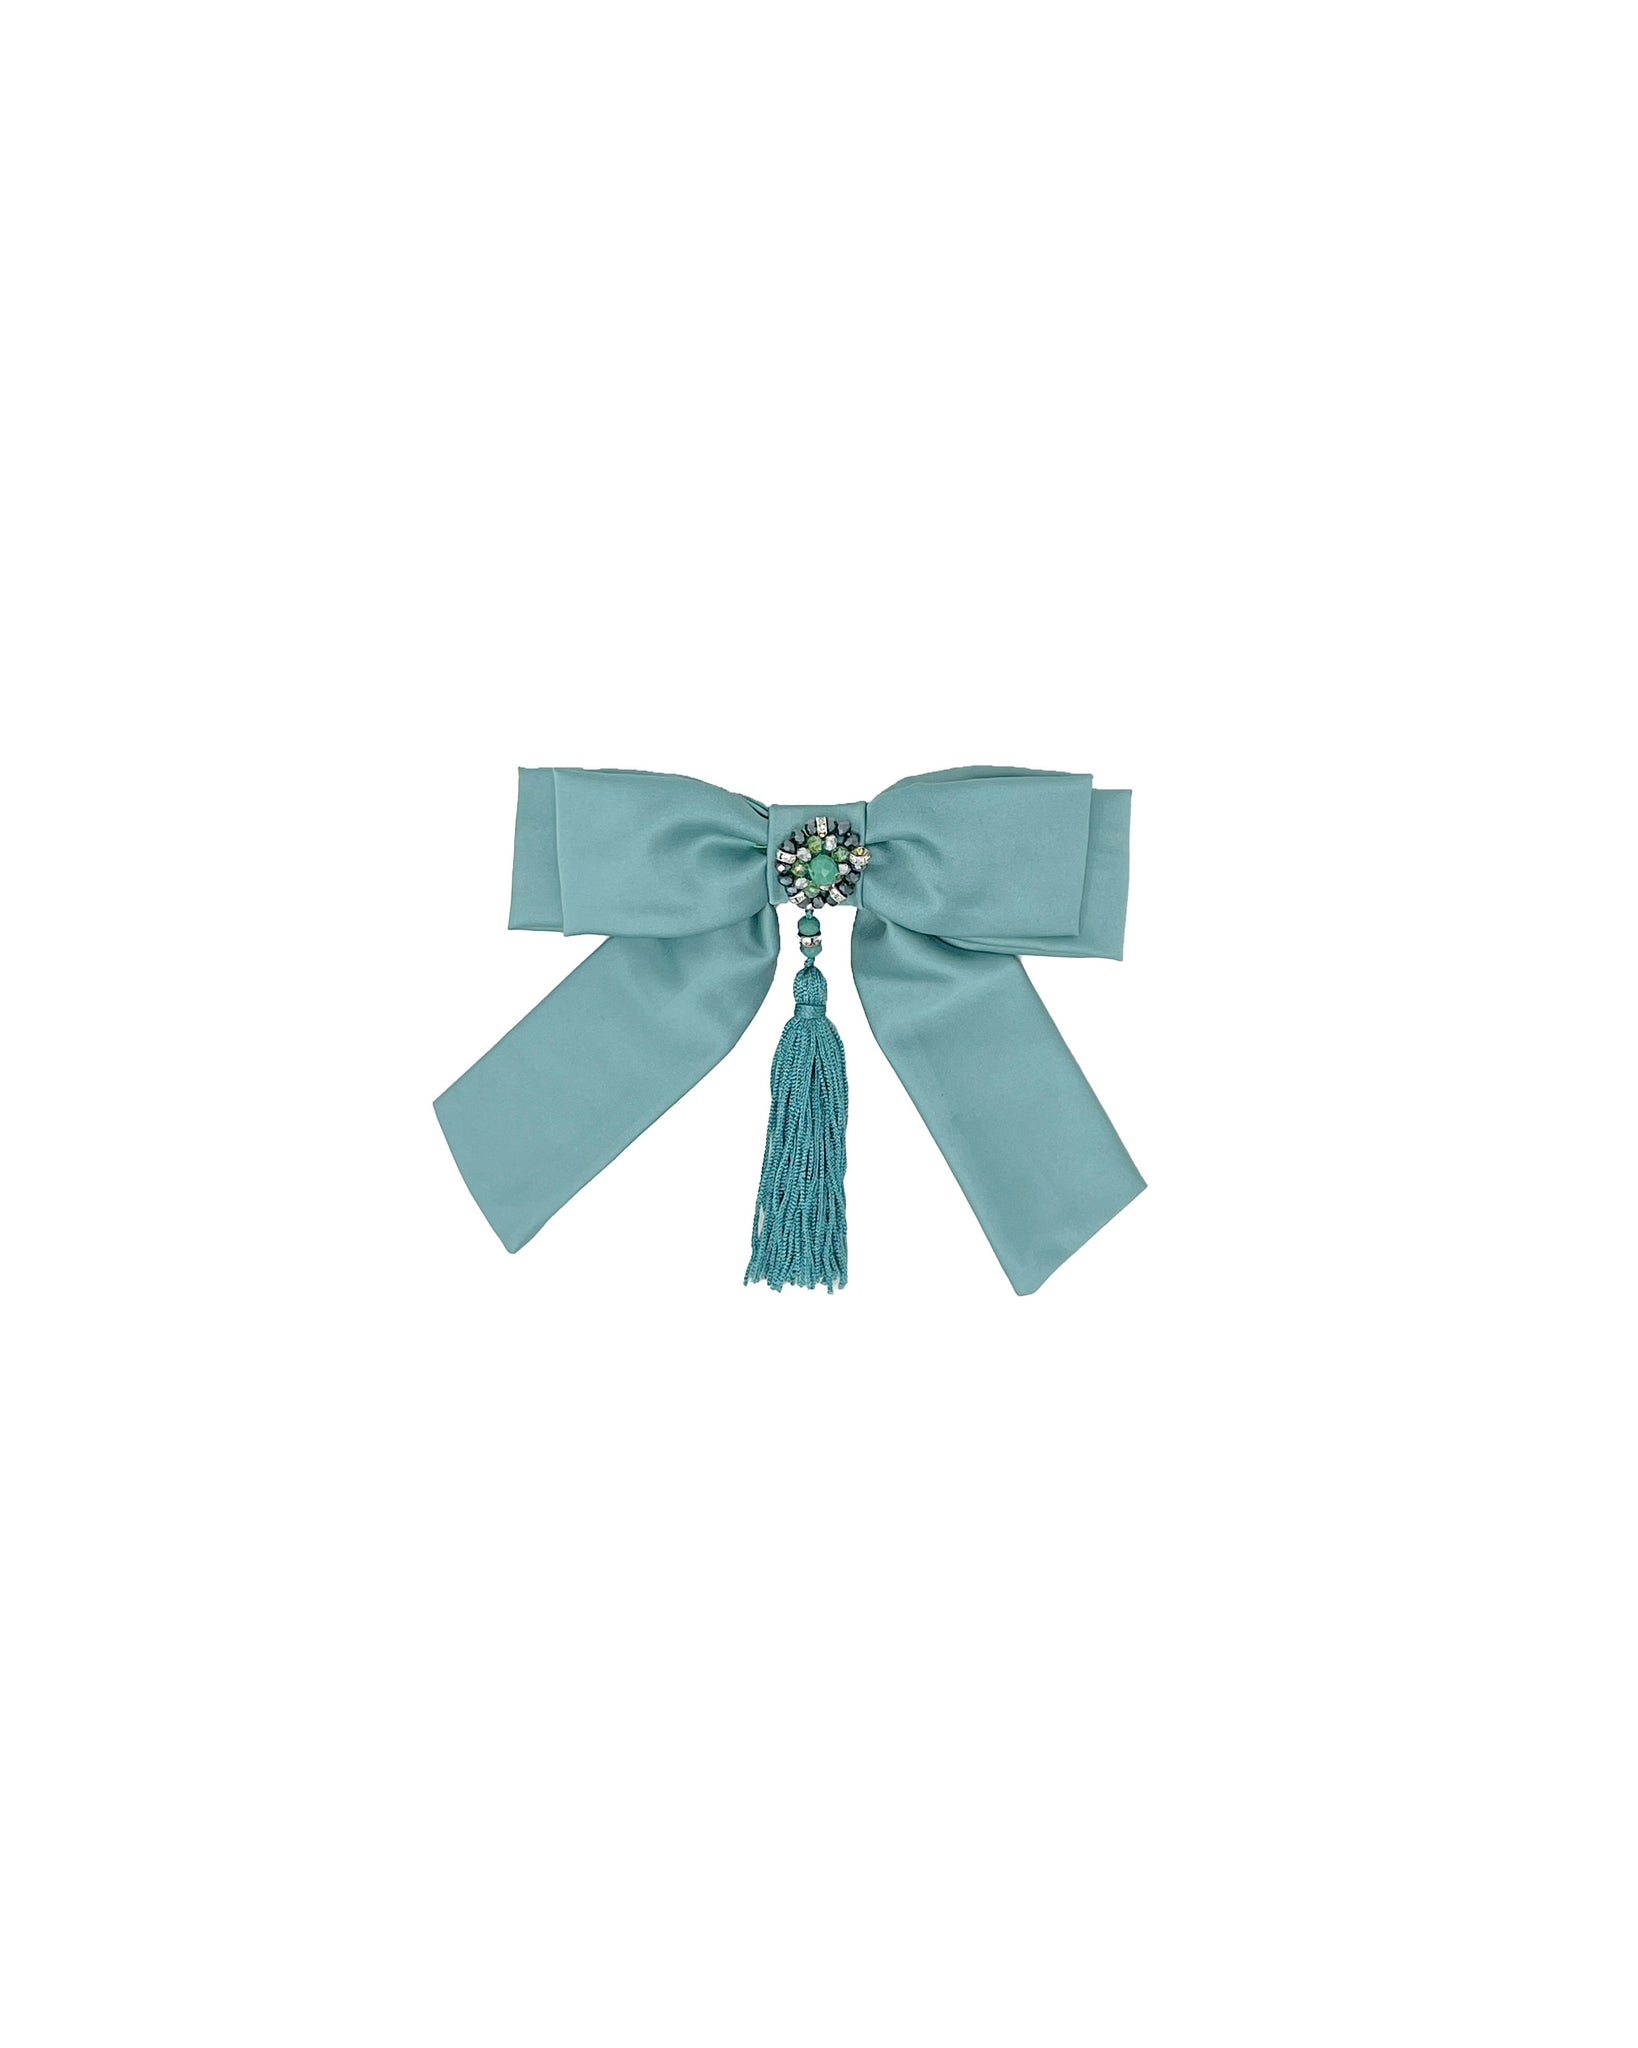 Aqua green satin hair bow with embroidered knot and central tassel